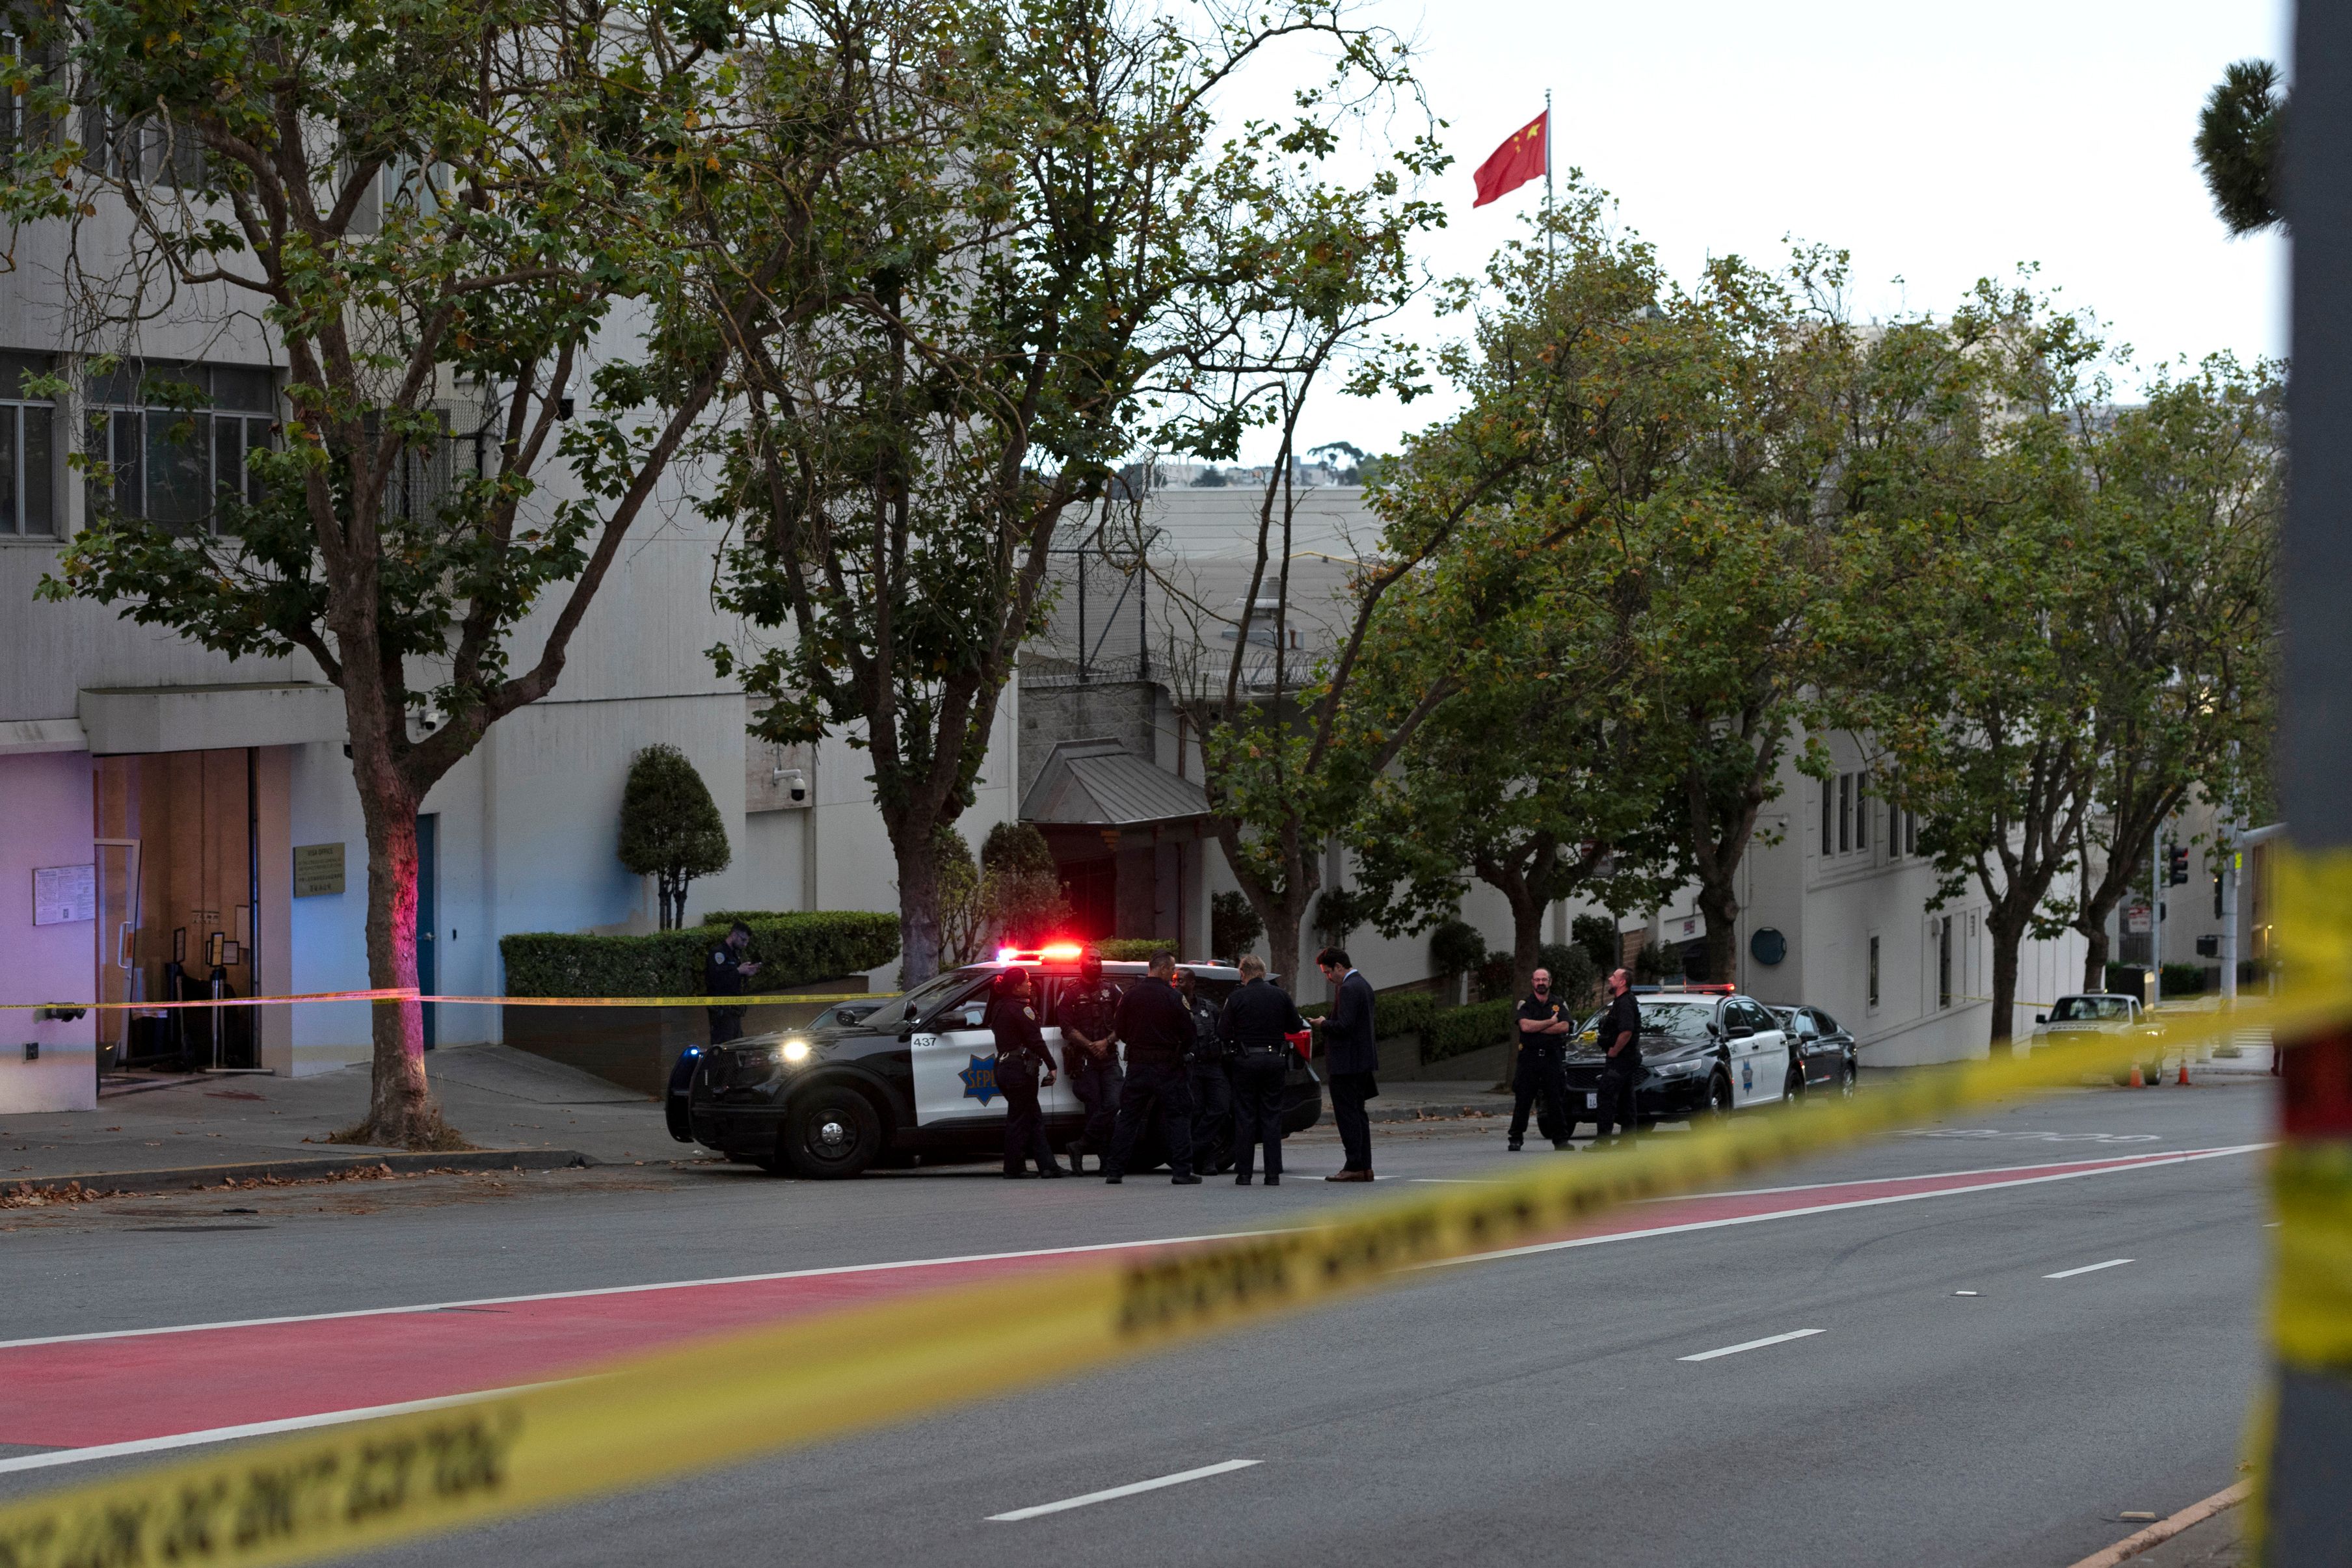 Police officers are seen outside the visa office of the Chinese consulate, where earlier a vehicle crashed into the building, in San Francisco, California, on 9 October 2023